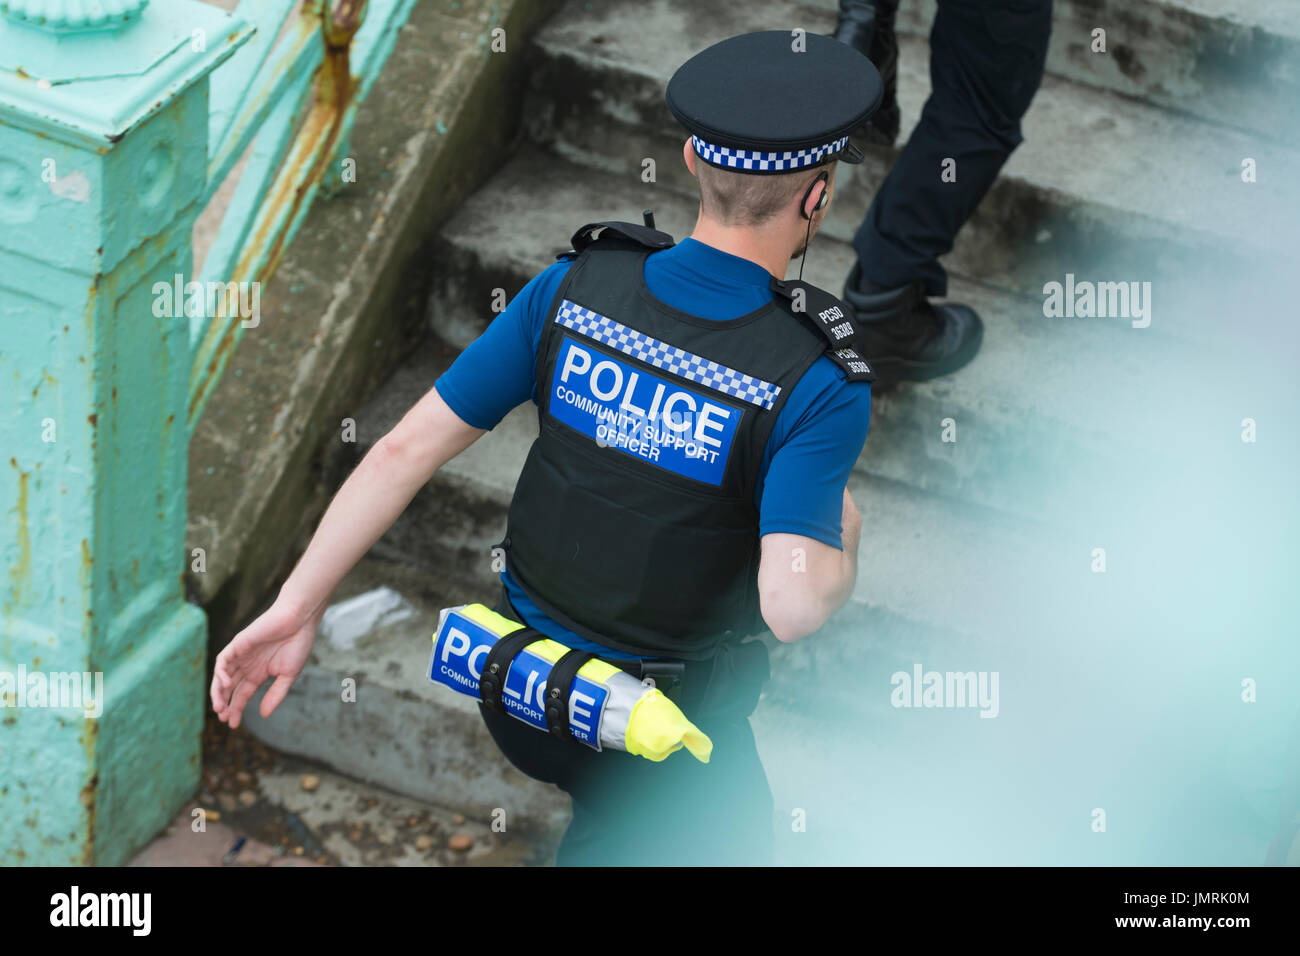 PCSO (Police Community Support Officer) running up steps in Brighton, East Sussex, England, UK. Stock Photo